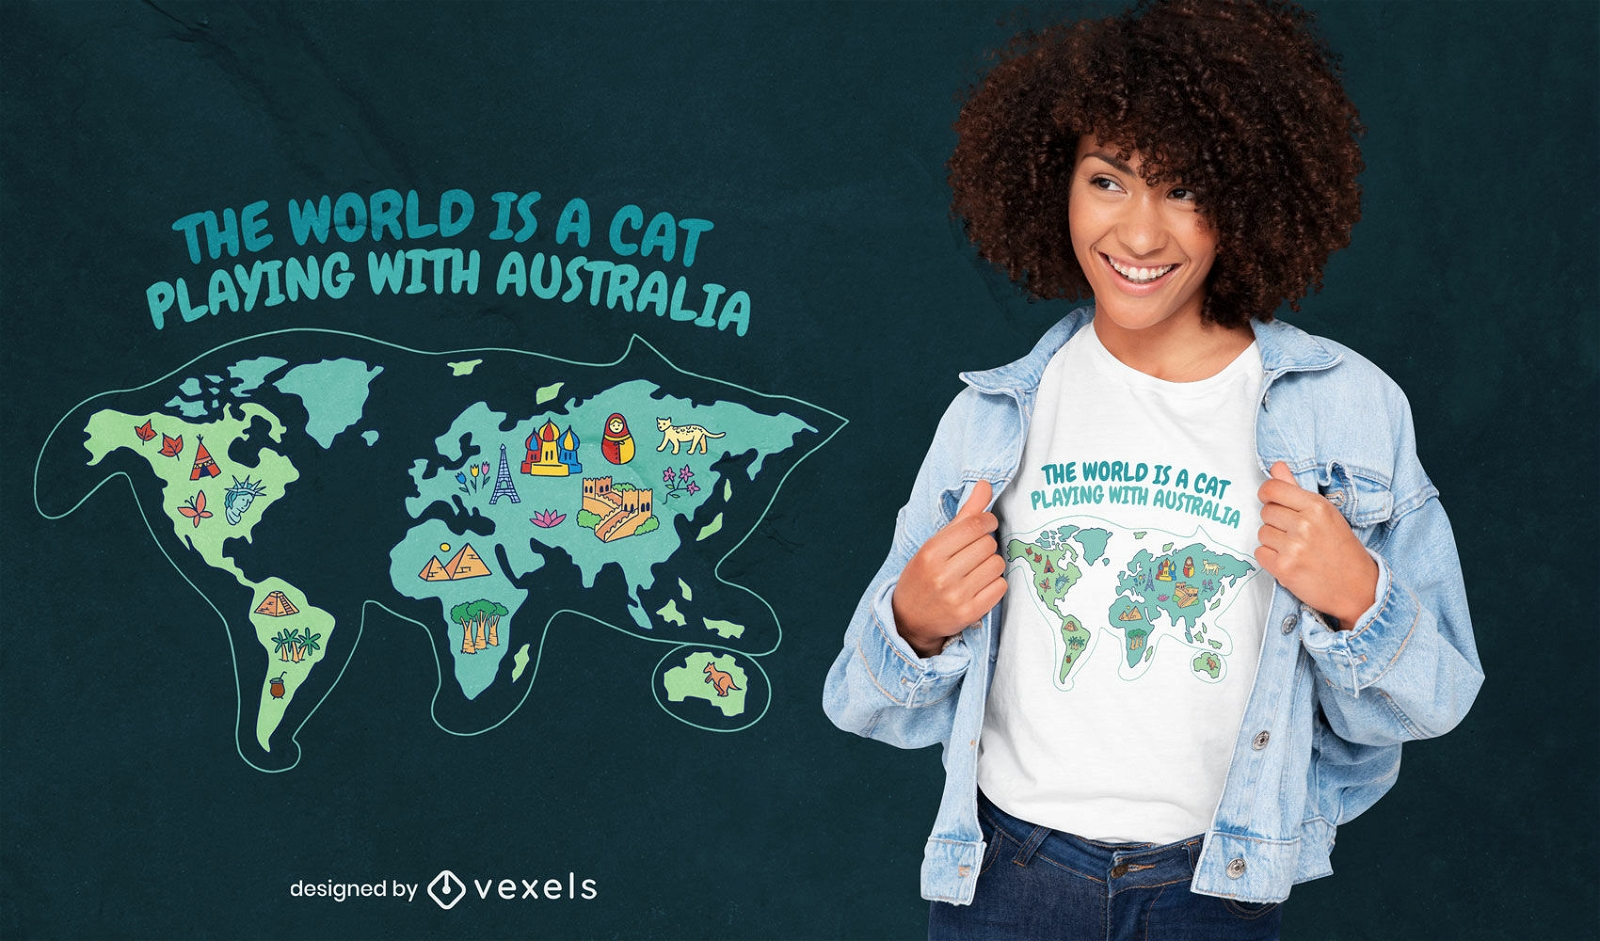 Cat playing with australia t-shirt design